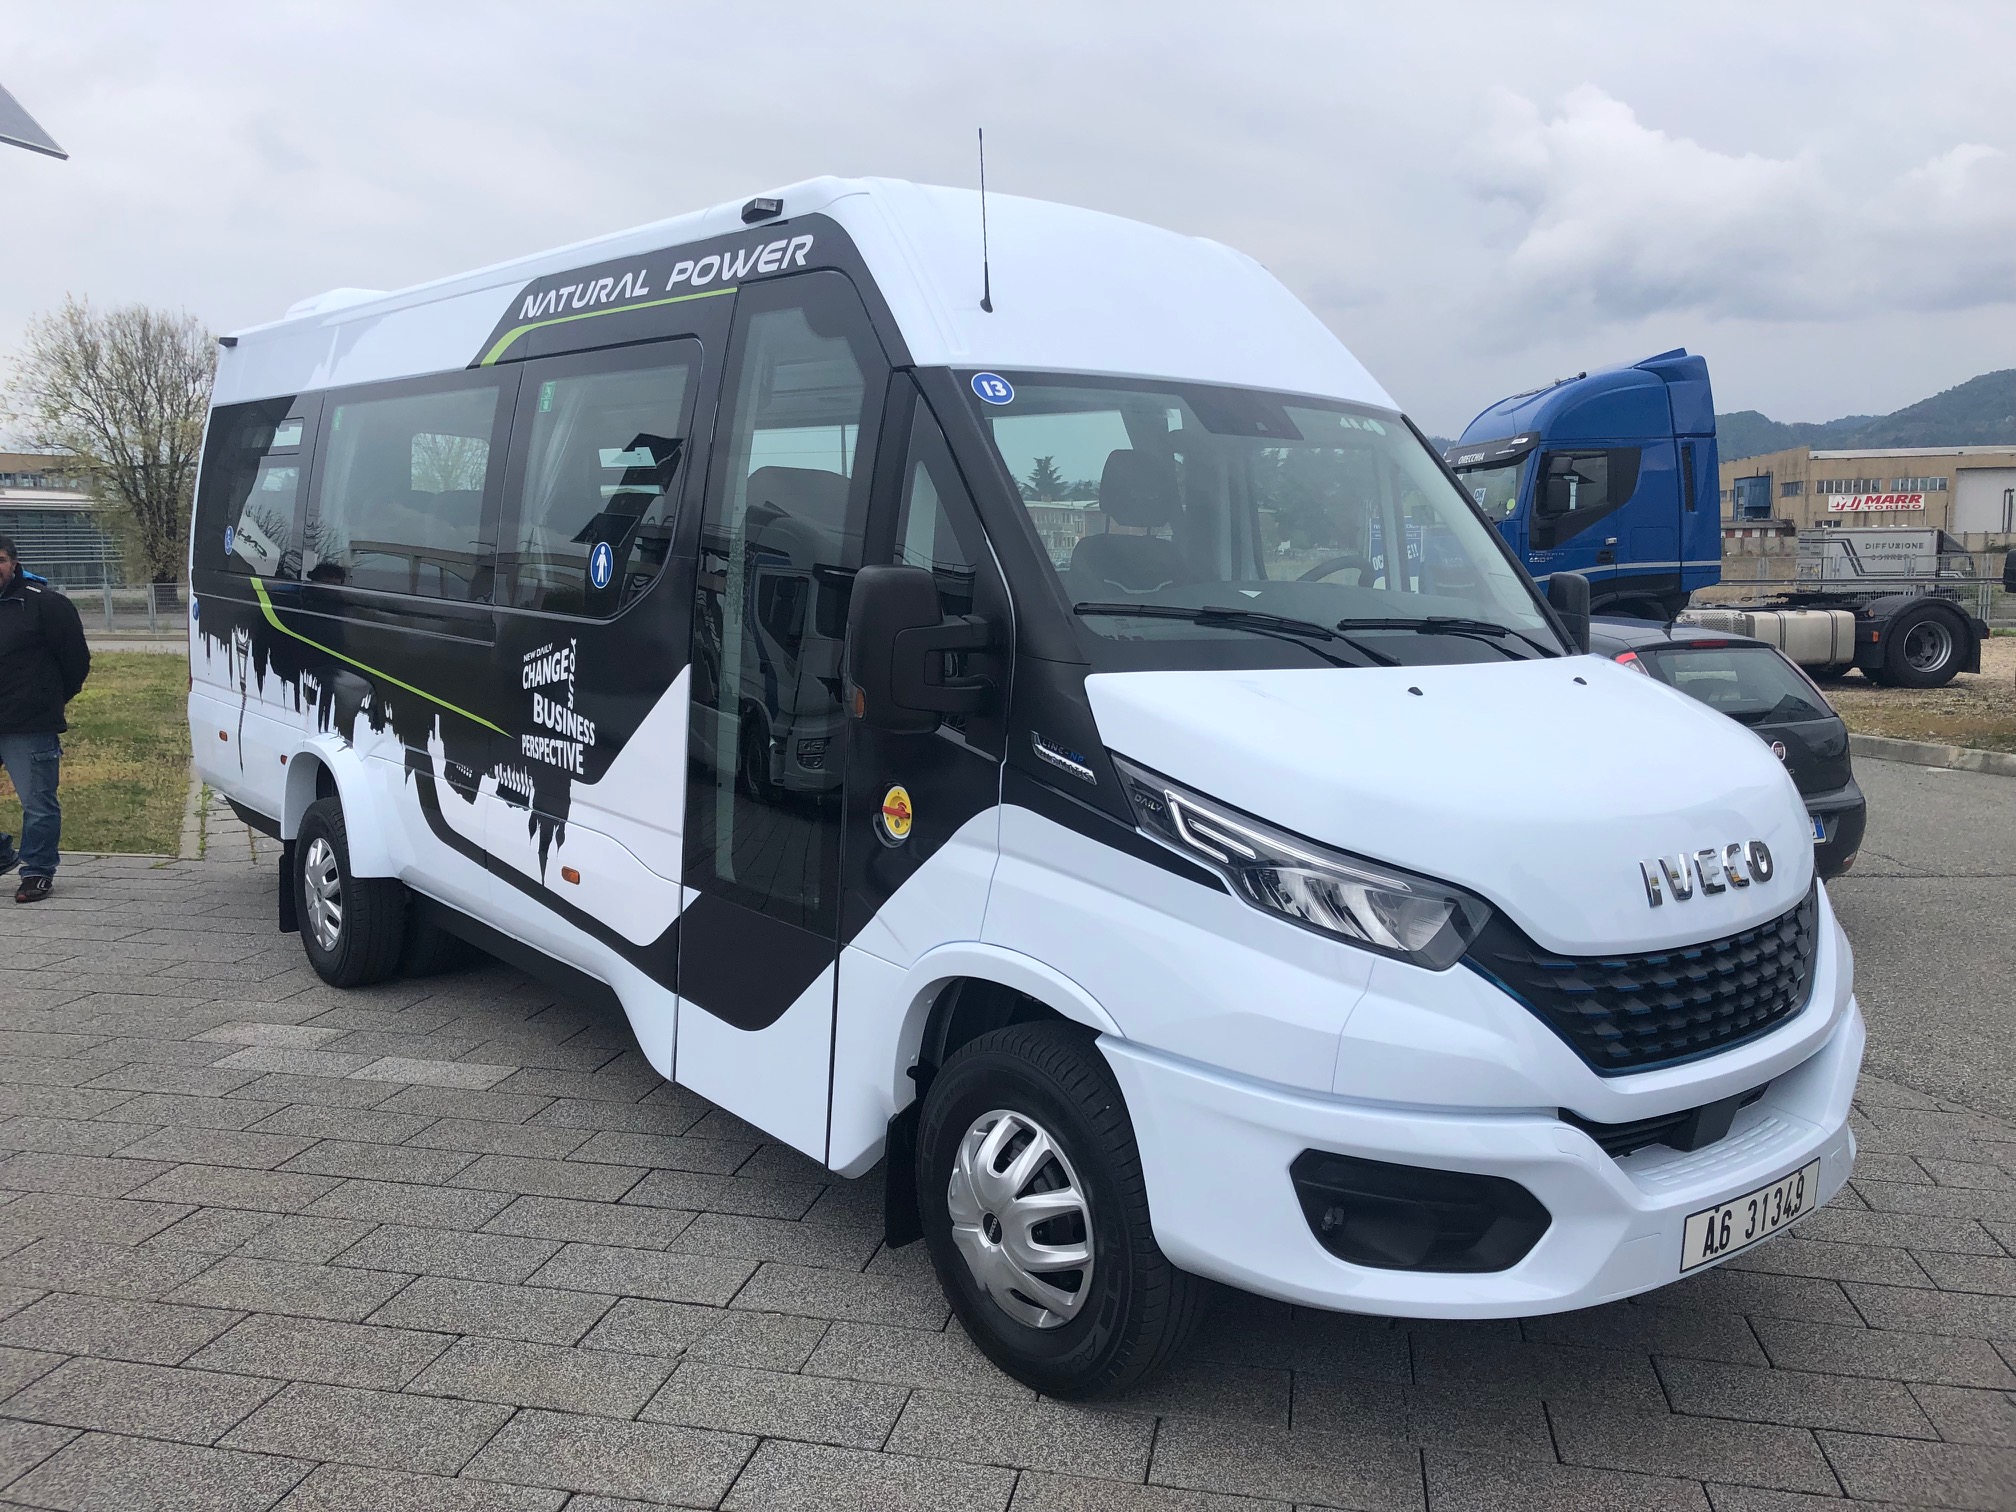 Nuovo Iveco Daily